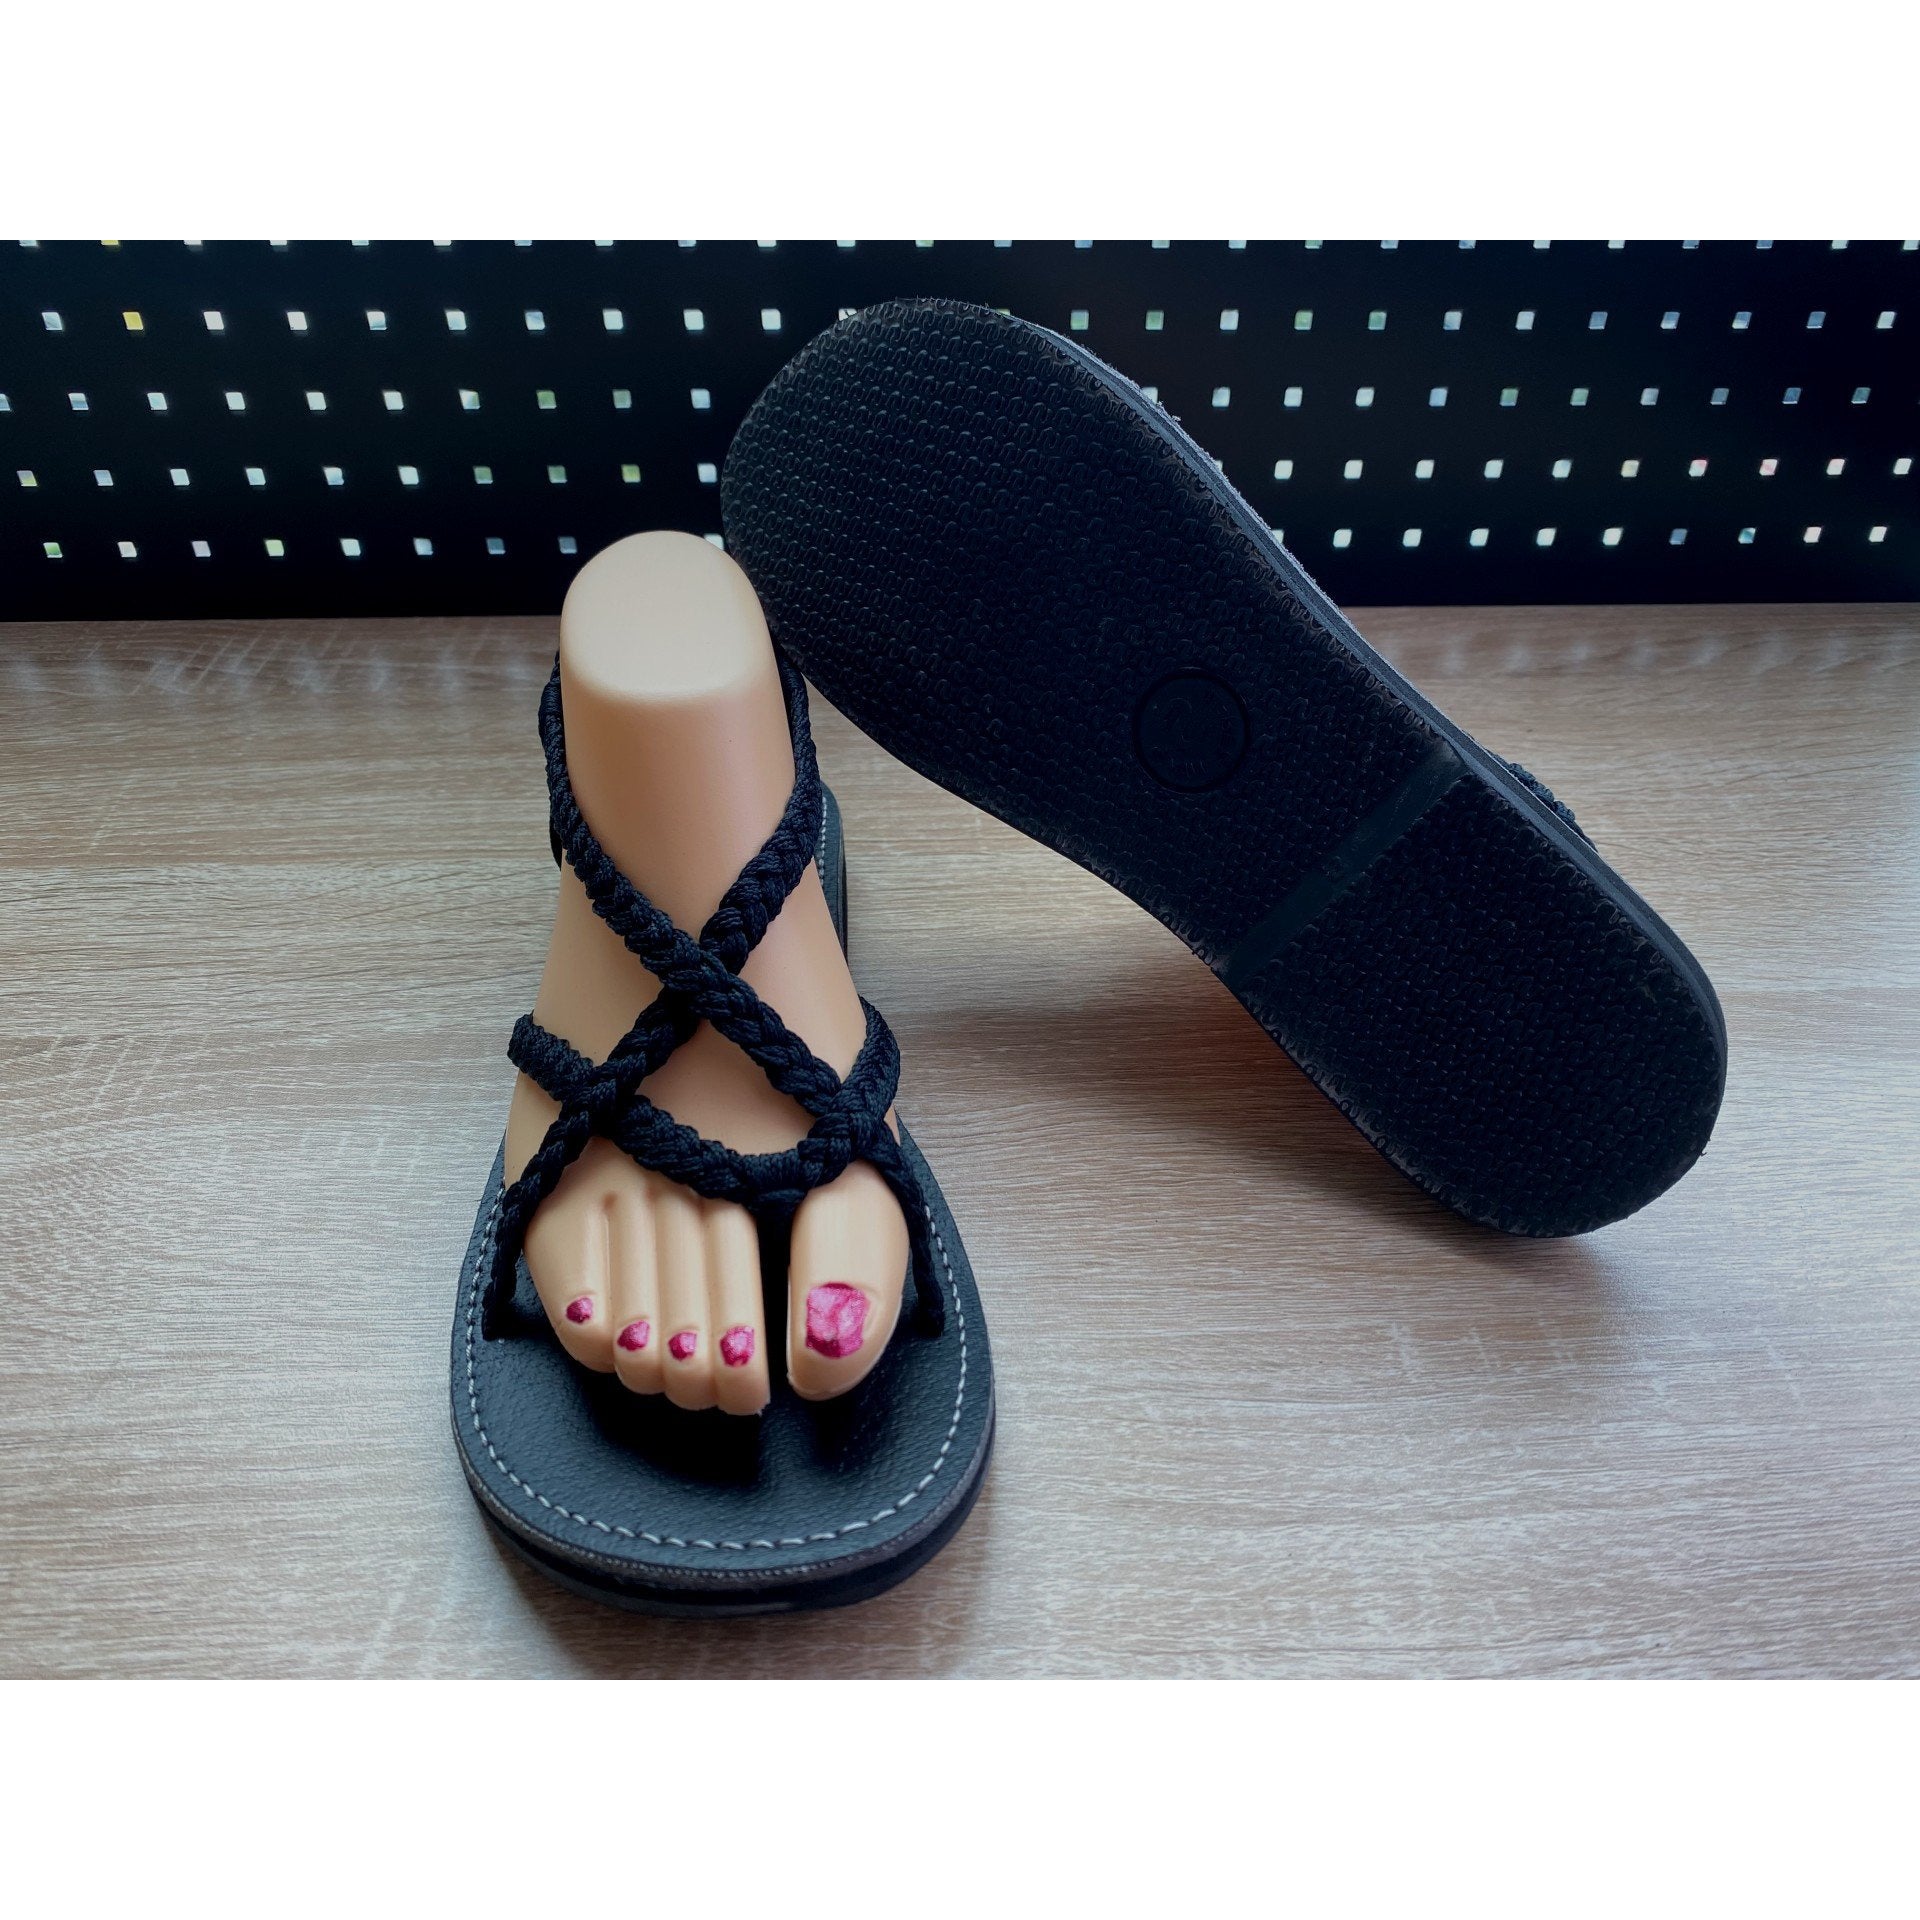 Shoes - Braided Sandals Black